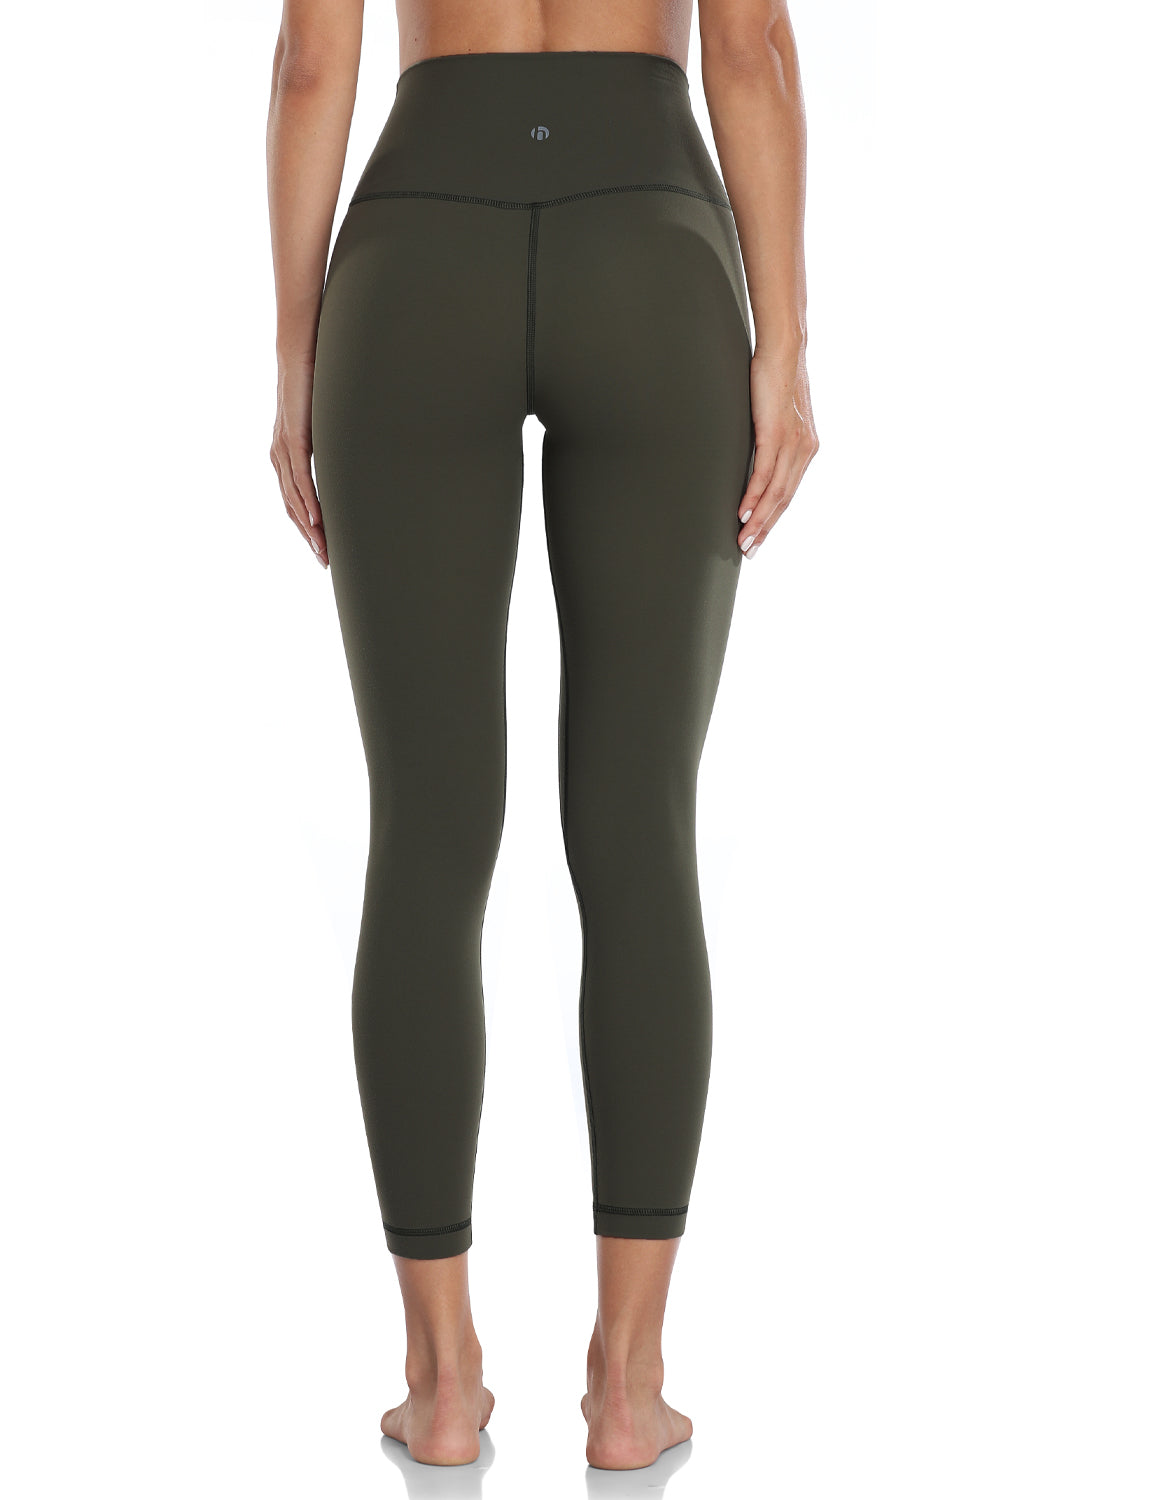  HeyNuts Essential High Waisted Yoga Leggings For Tall Women,  Buttery Soft Full Length Workout Pants 28 Everglade Green L